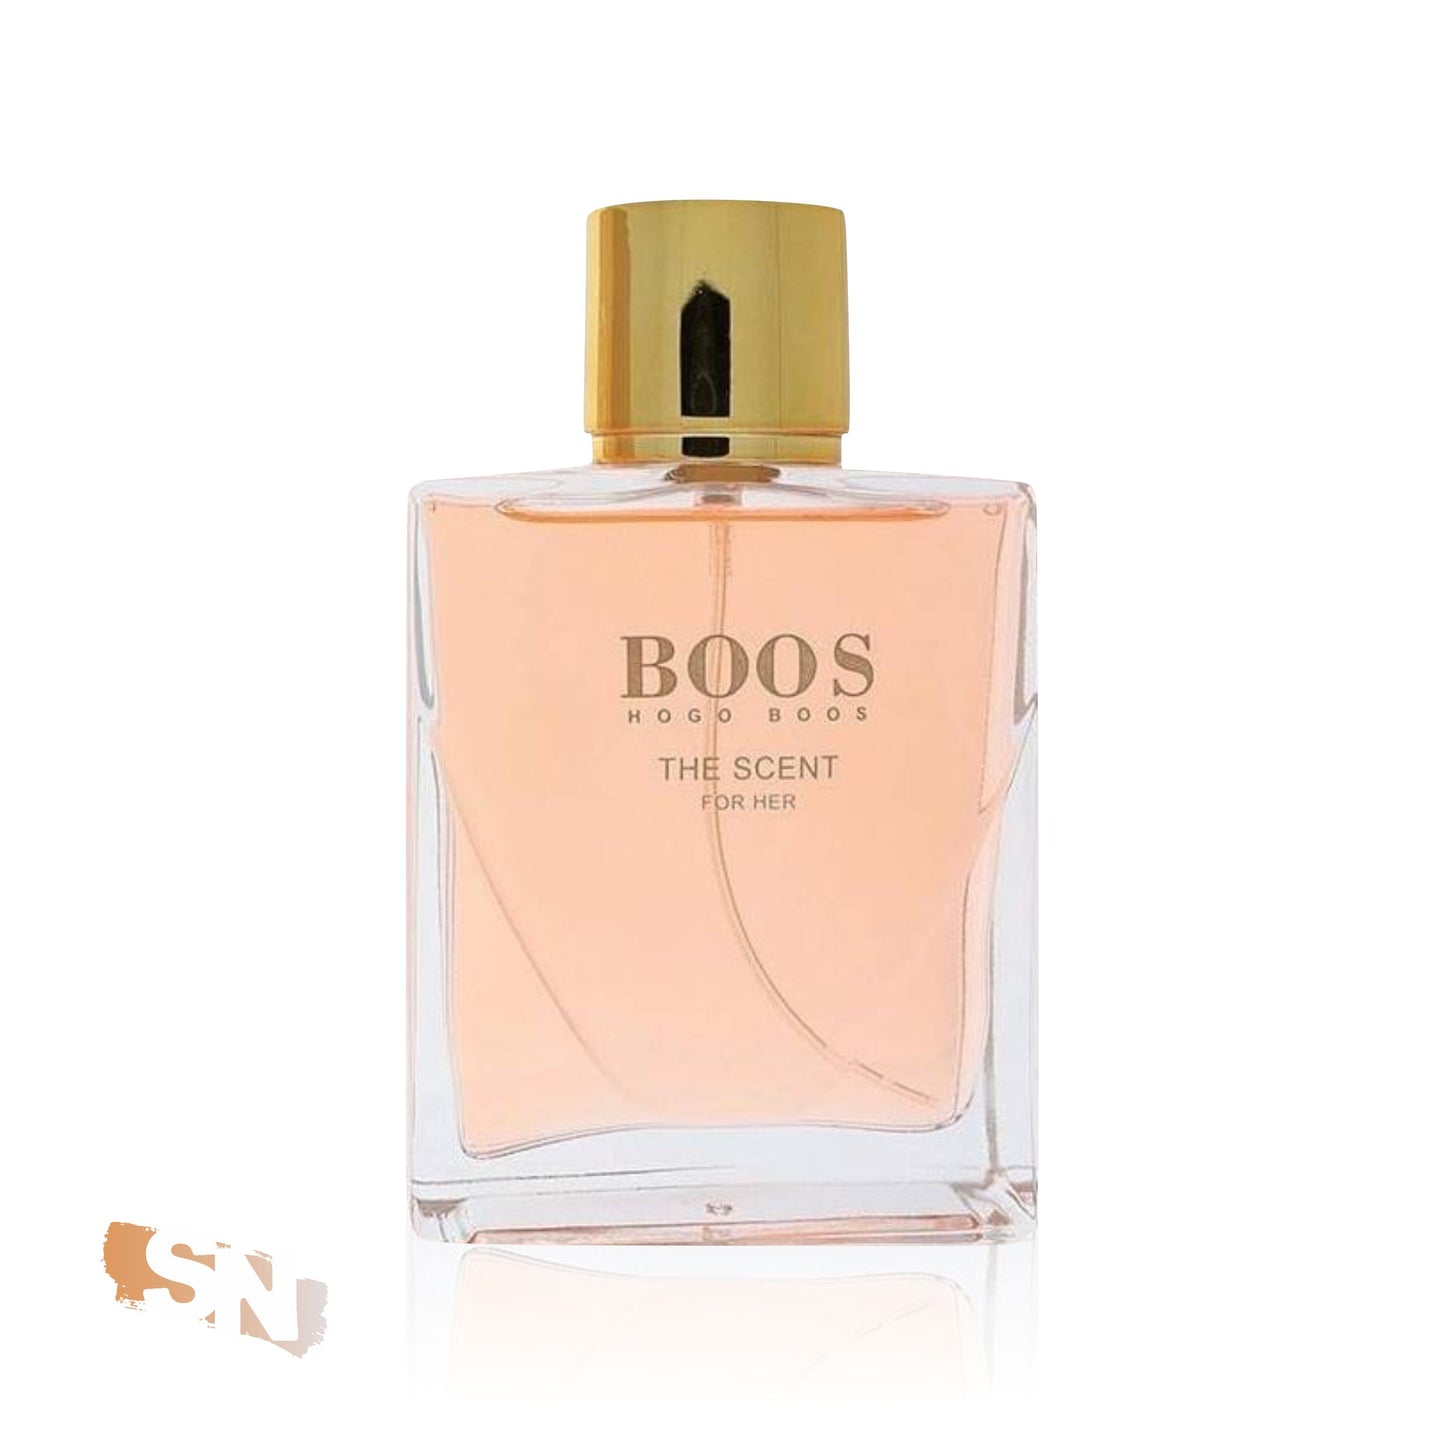 Hogo Boos The Scent | 100ml